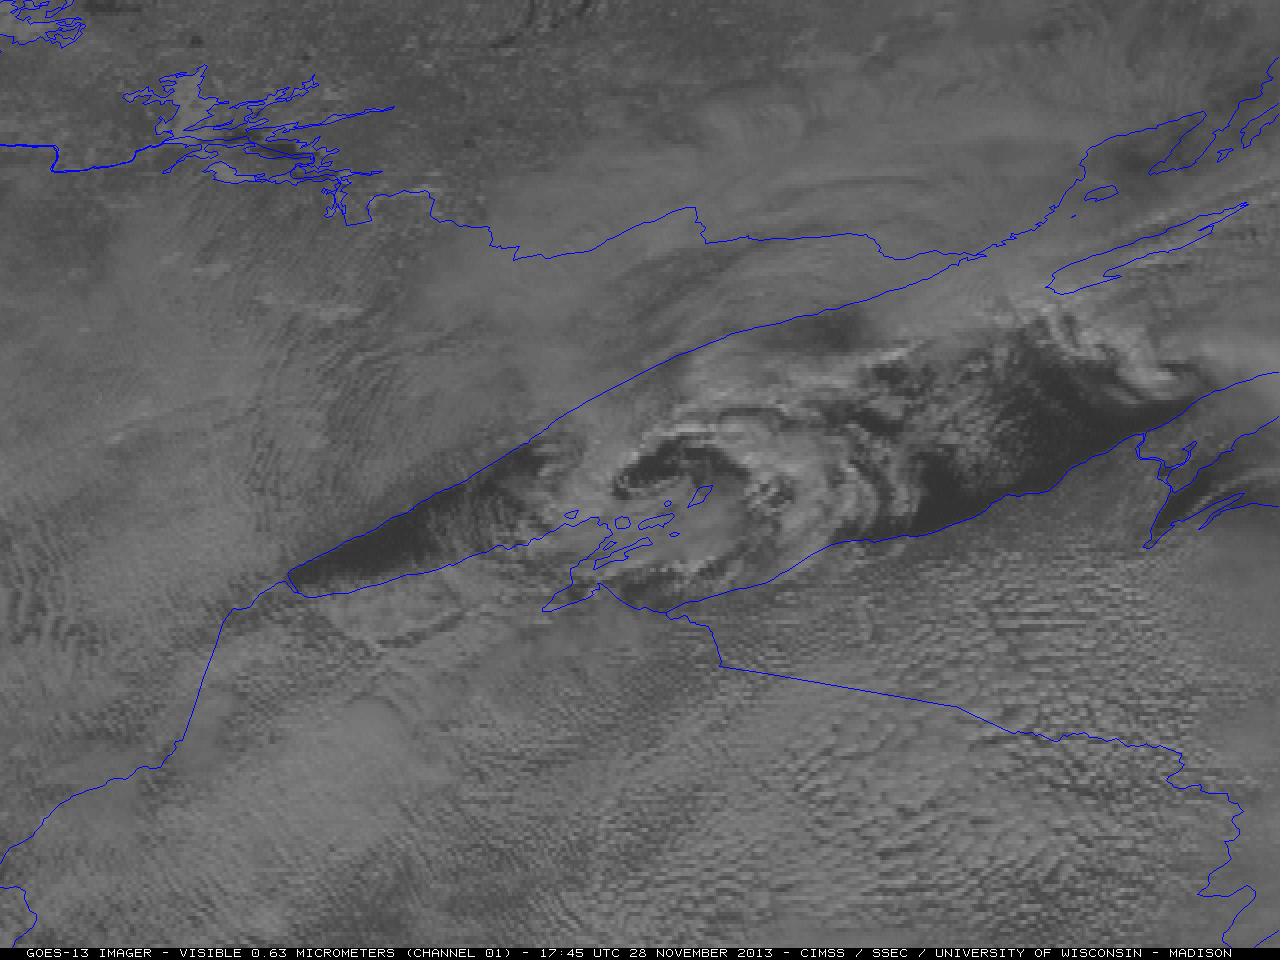 GOES-13 0.63 Âµm visible channel images (click to play animation)